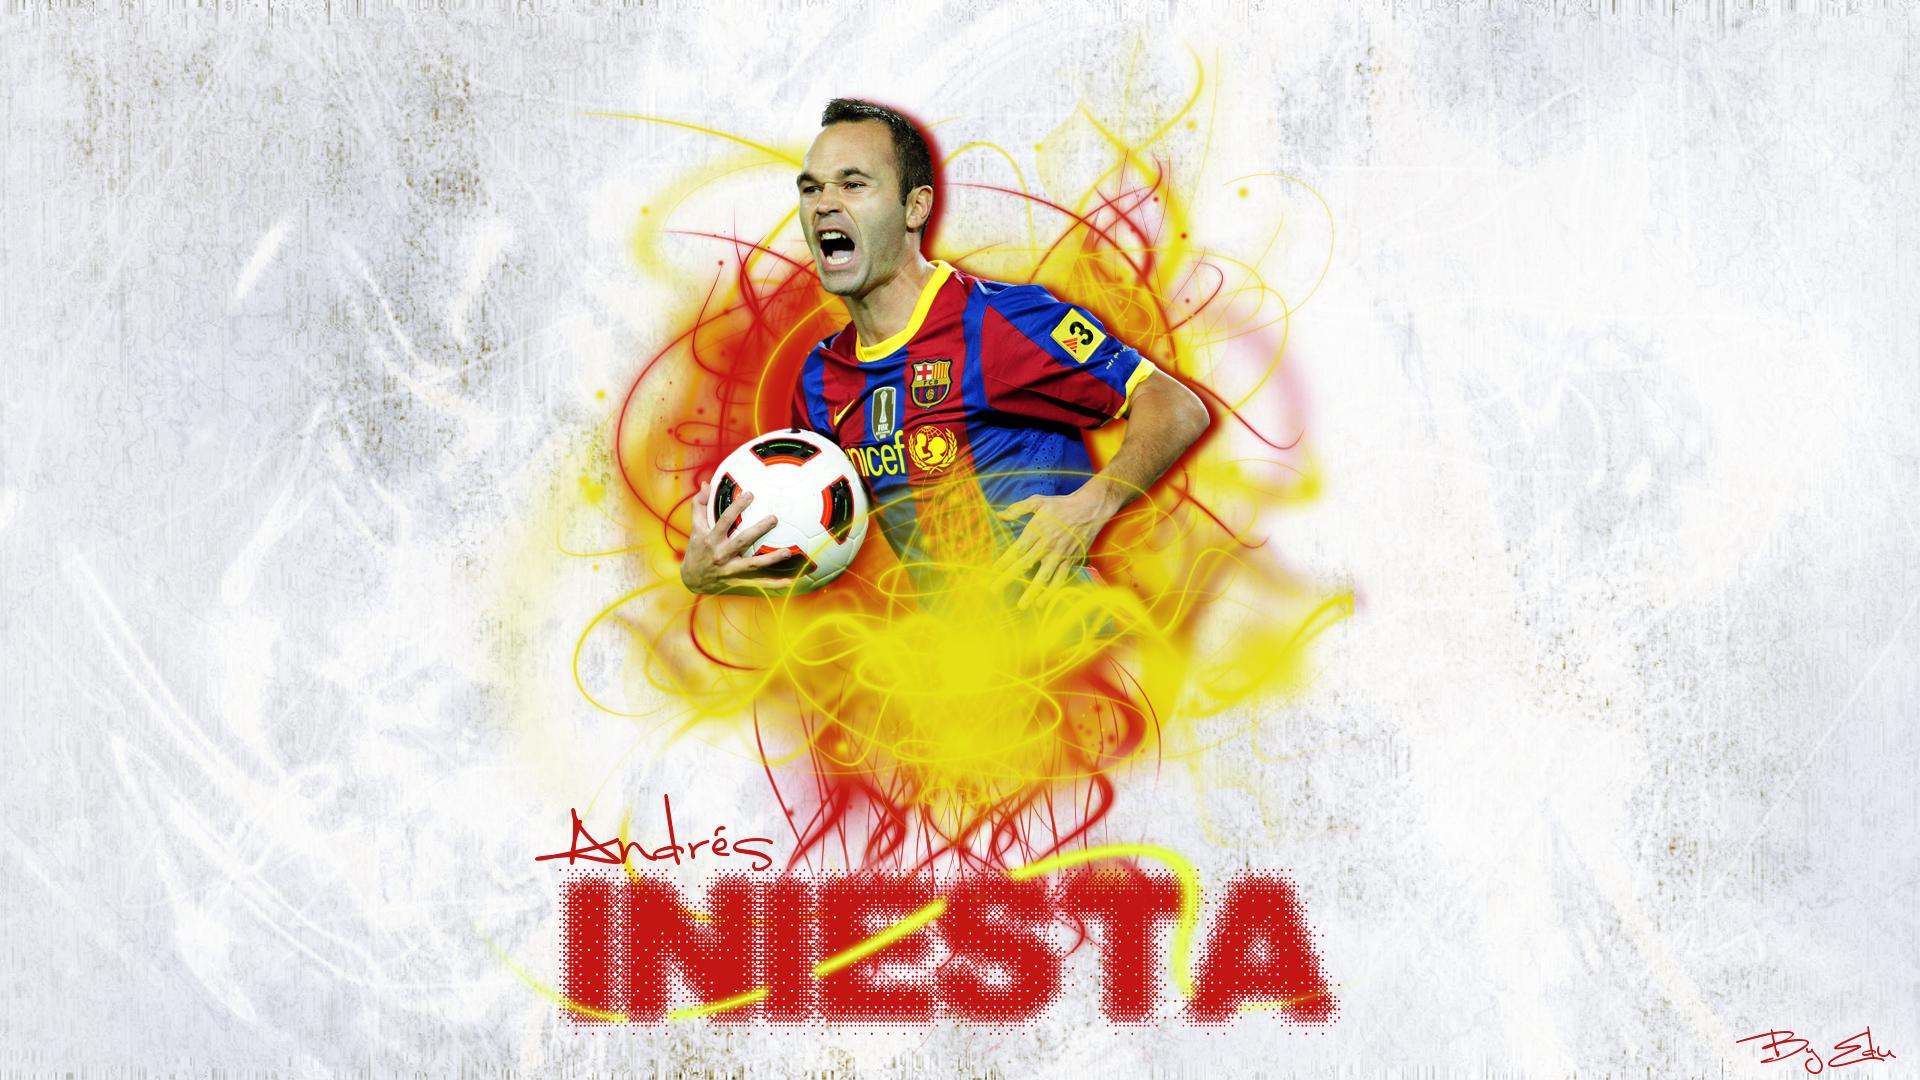 Andres Iniesta Latest Wallpaper - Football HD Backgrounds